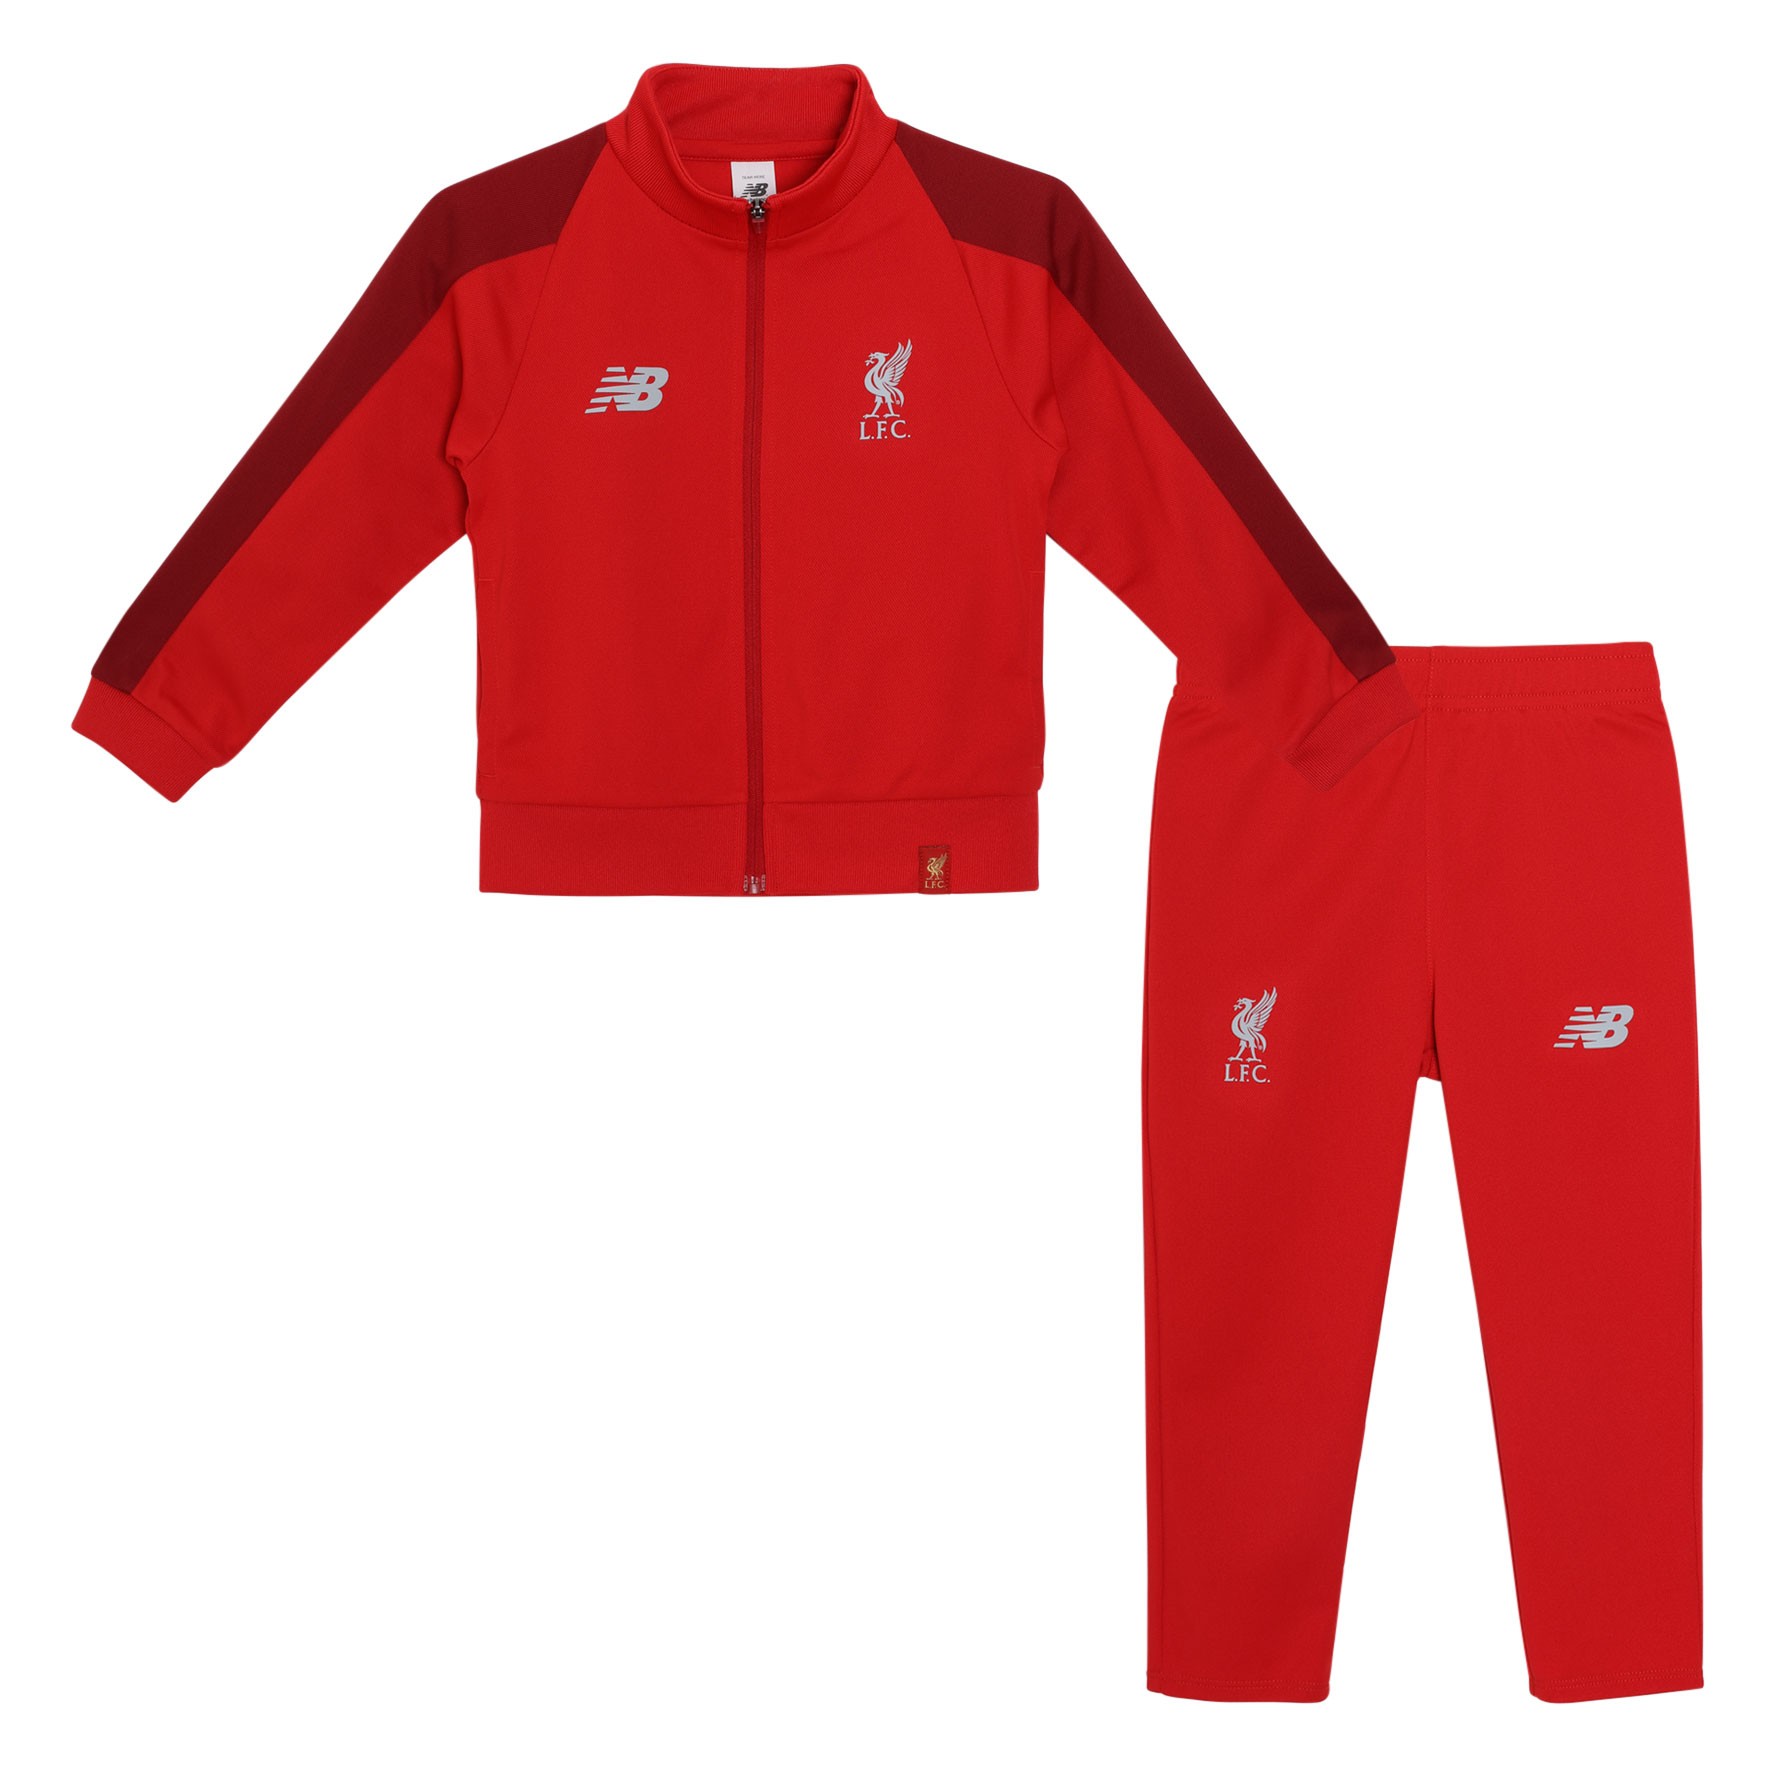 LFC Infant Red Training Knit Tracksuit 18/19